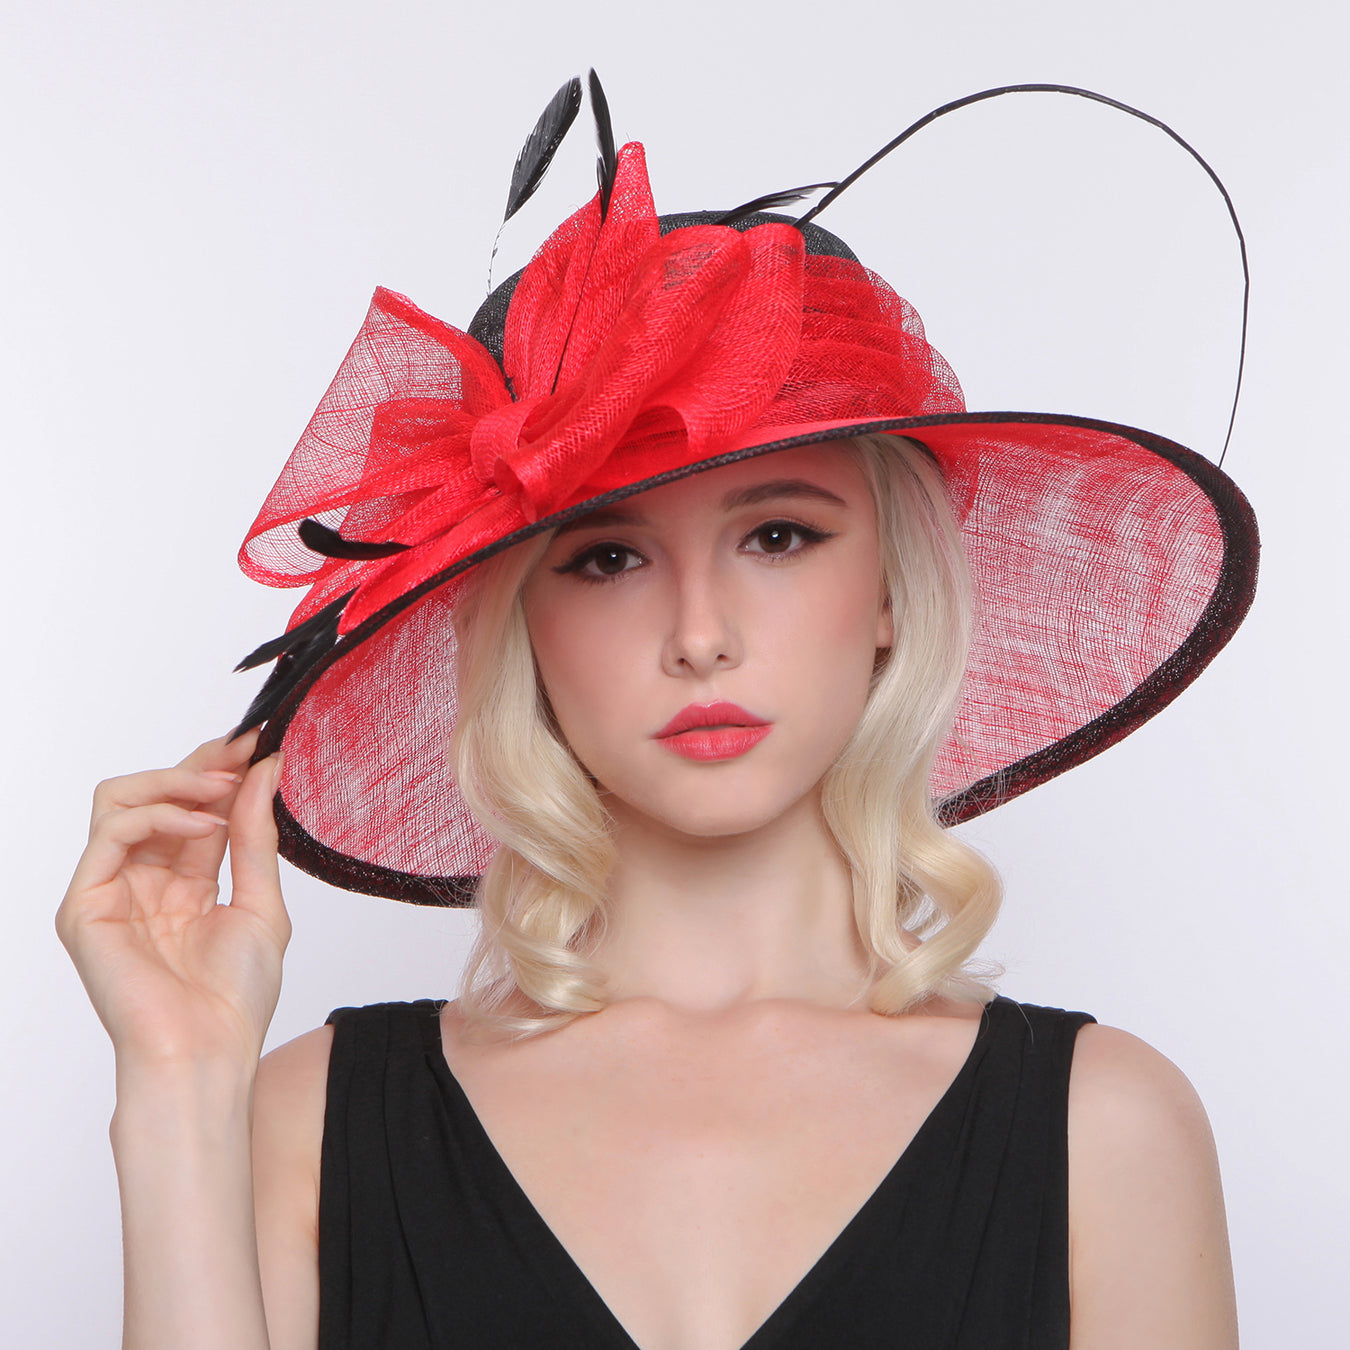 Fancy hats for wedding, tea, kentucky derby, church. Don't show up without one for a special occasion. 